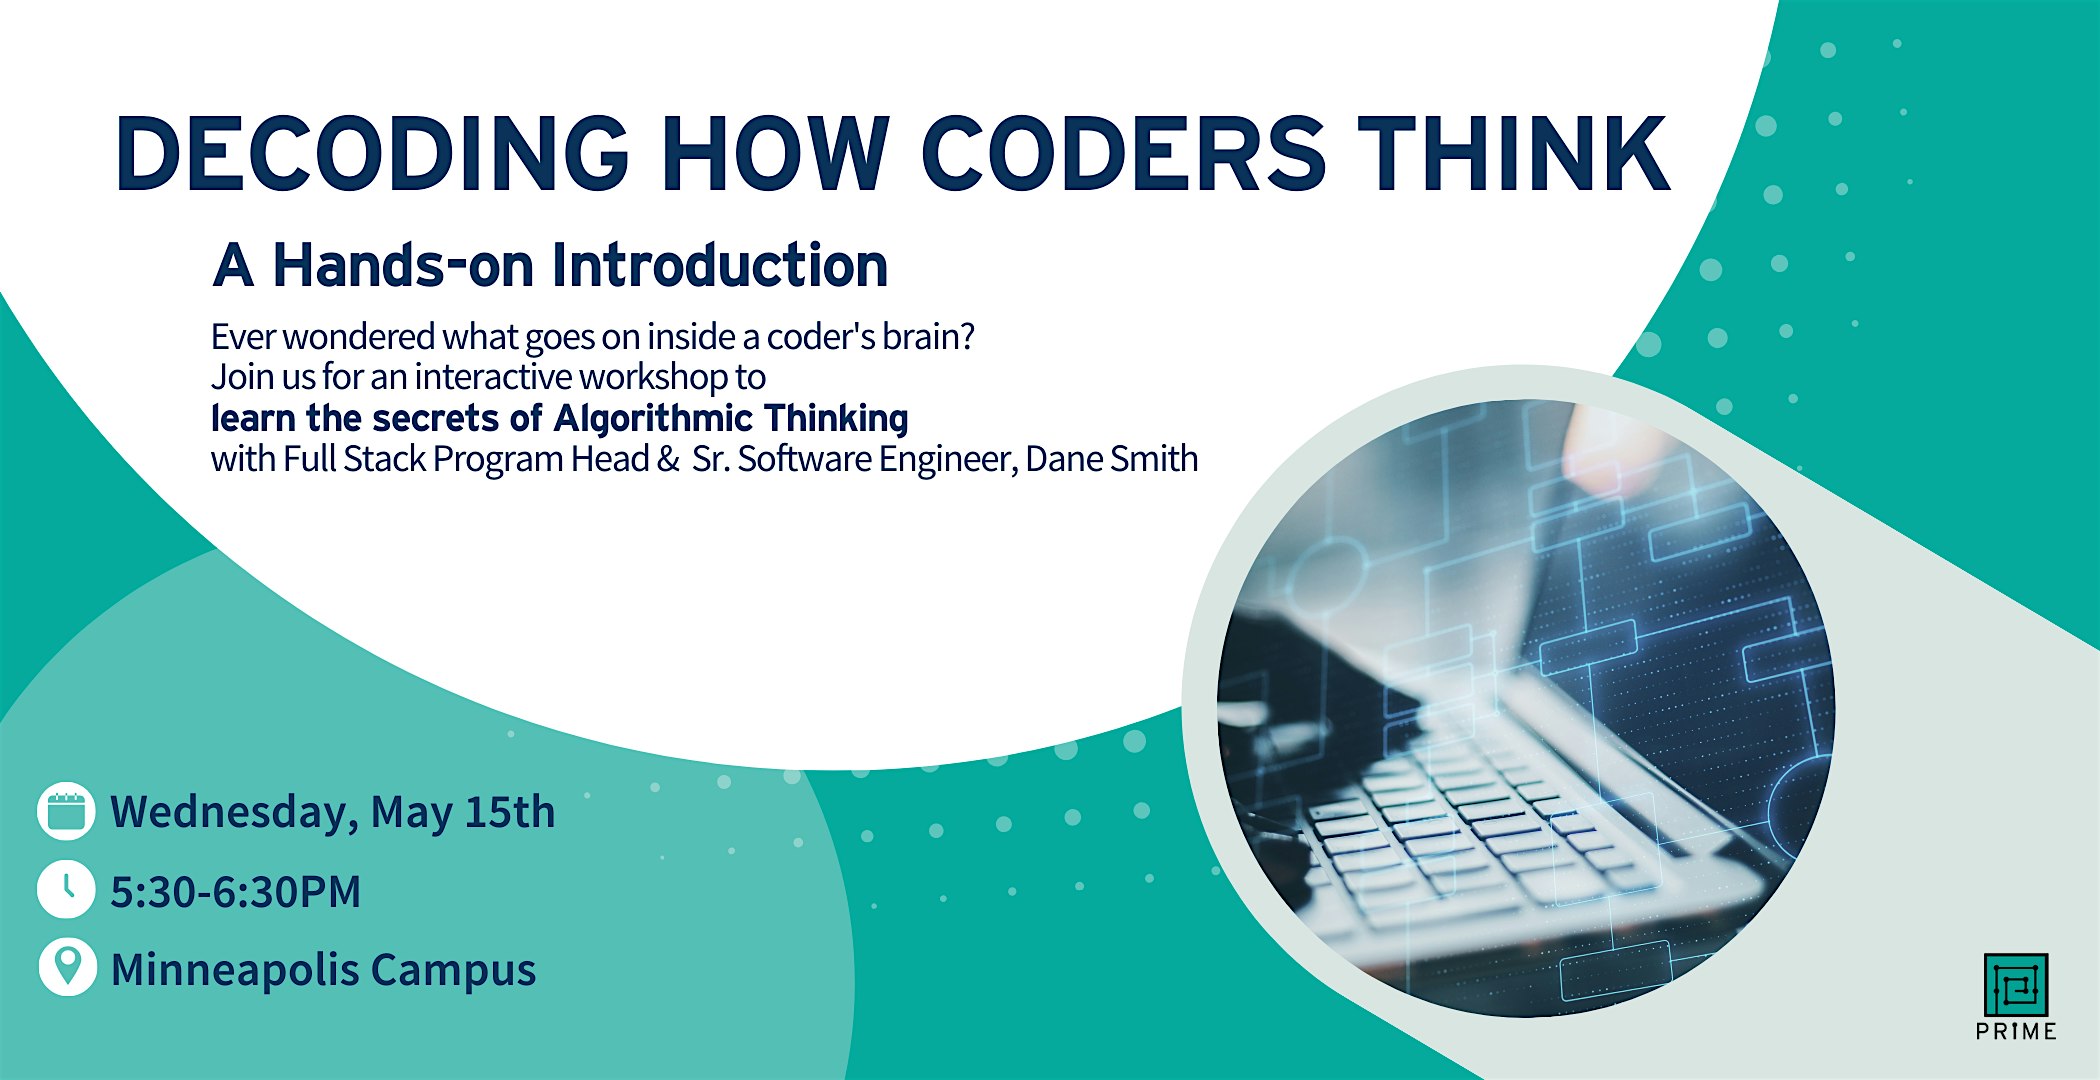 Decoding How Coders Think: A hands-on introduction